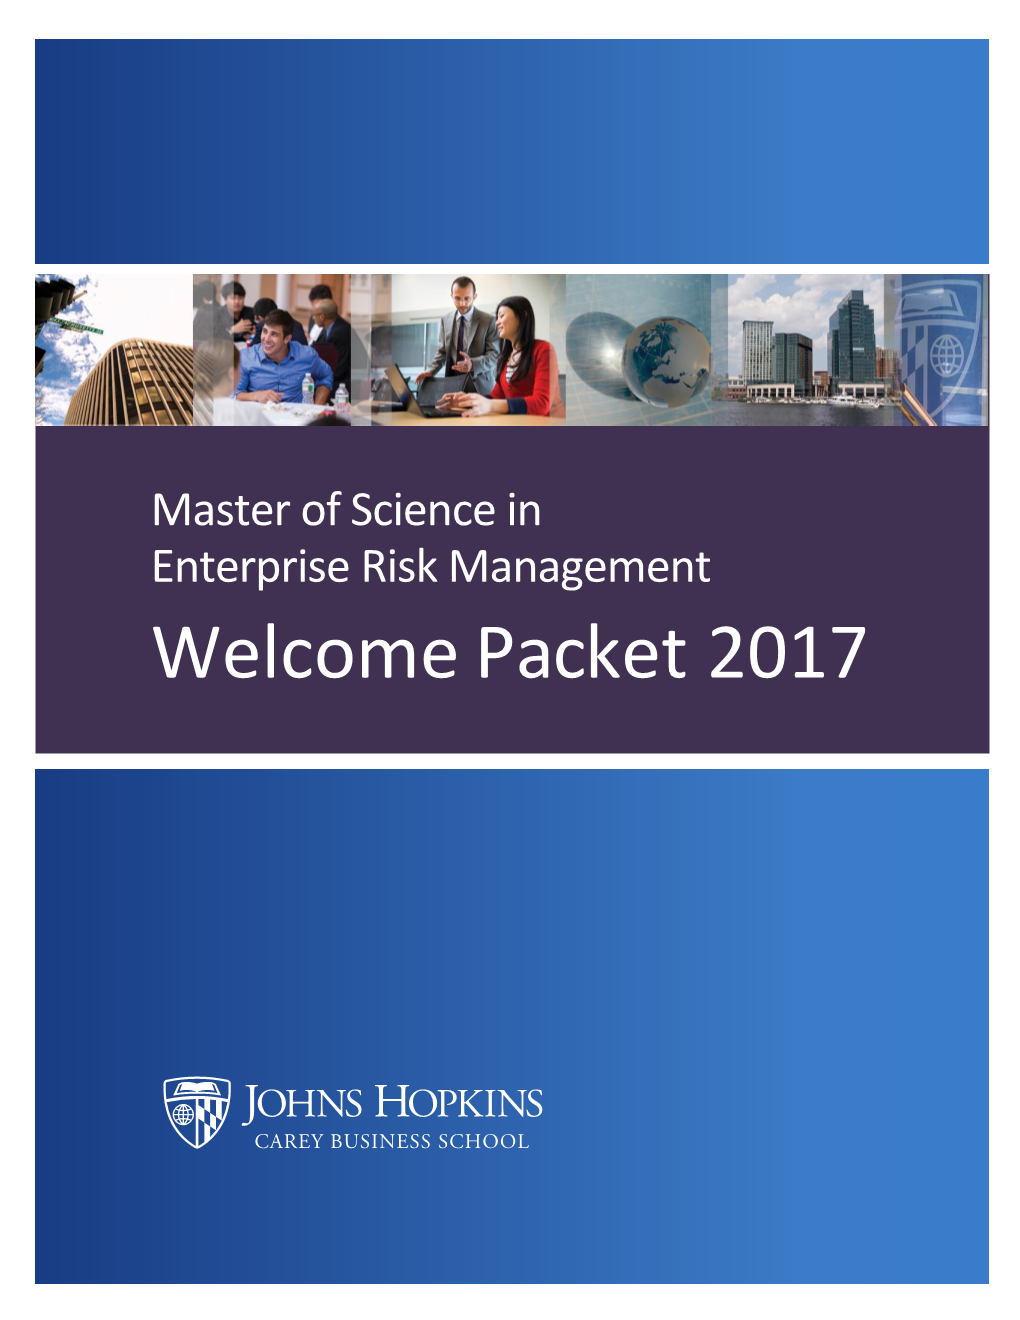 Welcome Packet 2017 MASTER of SCIENCE in ENTERPRISE RISK MANAGEMENT